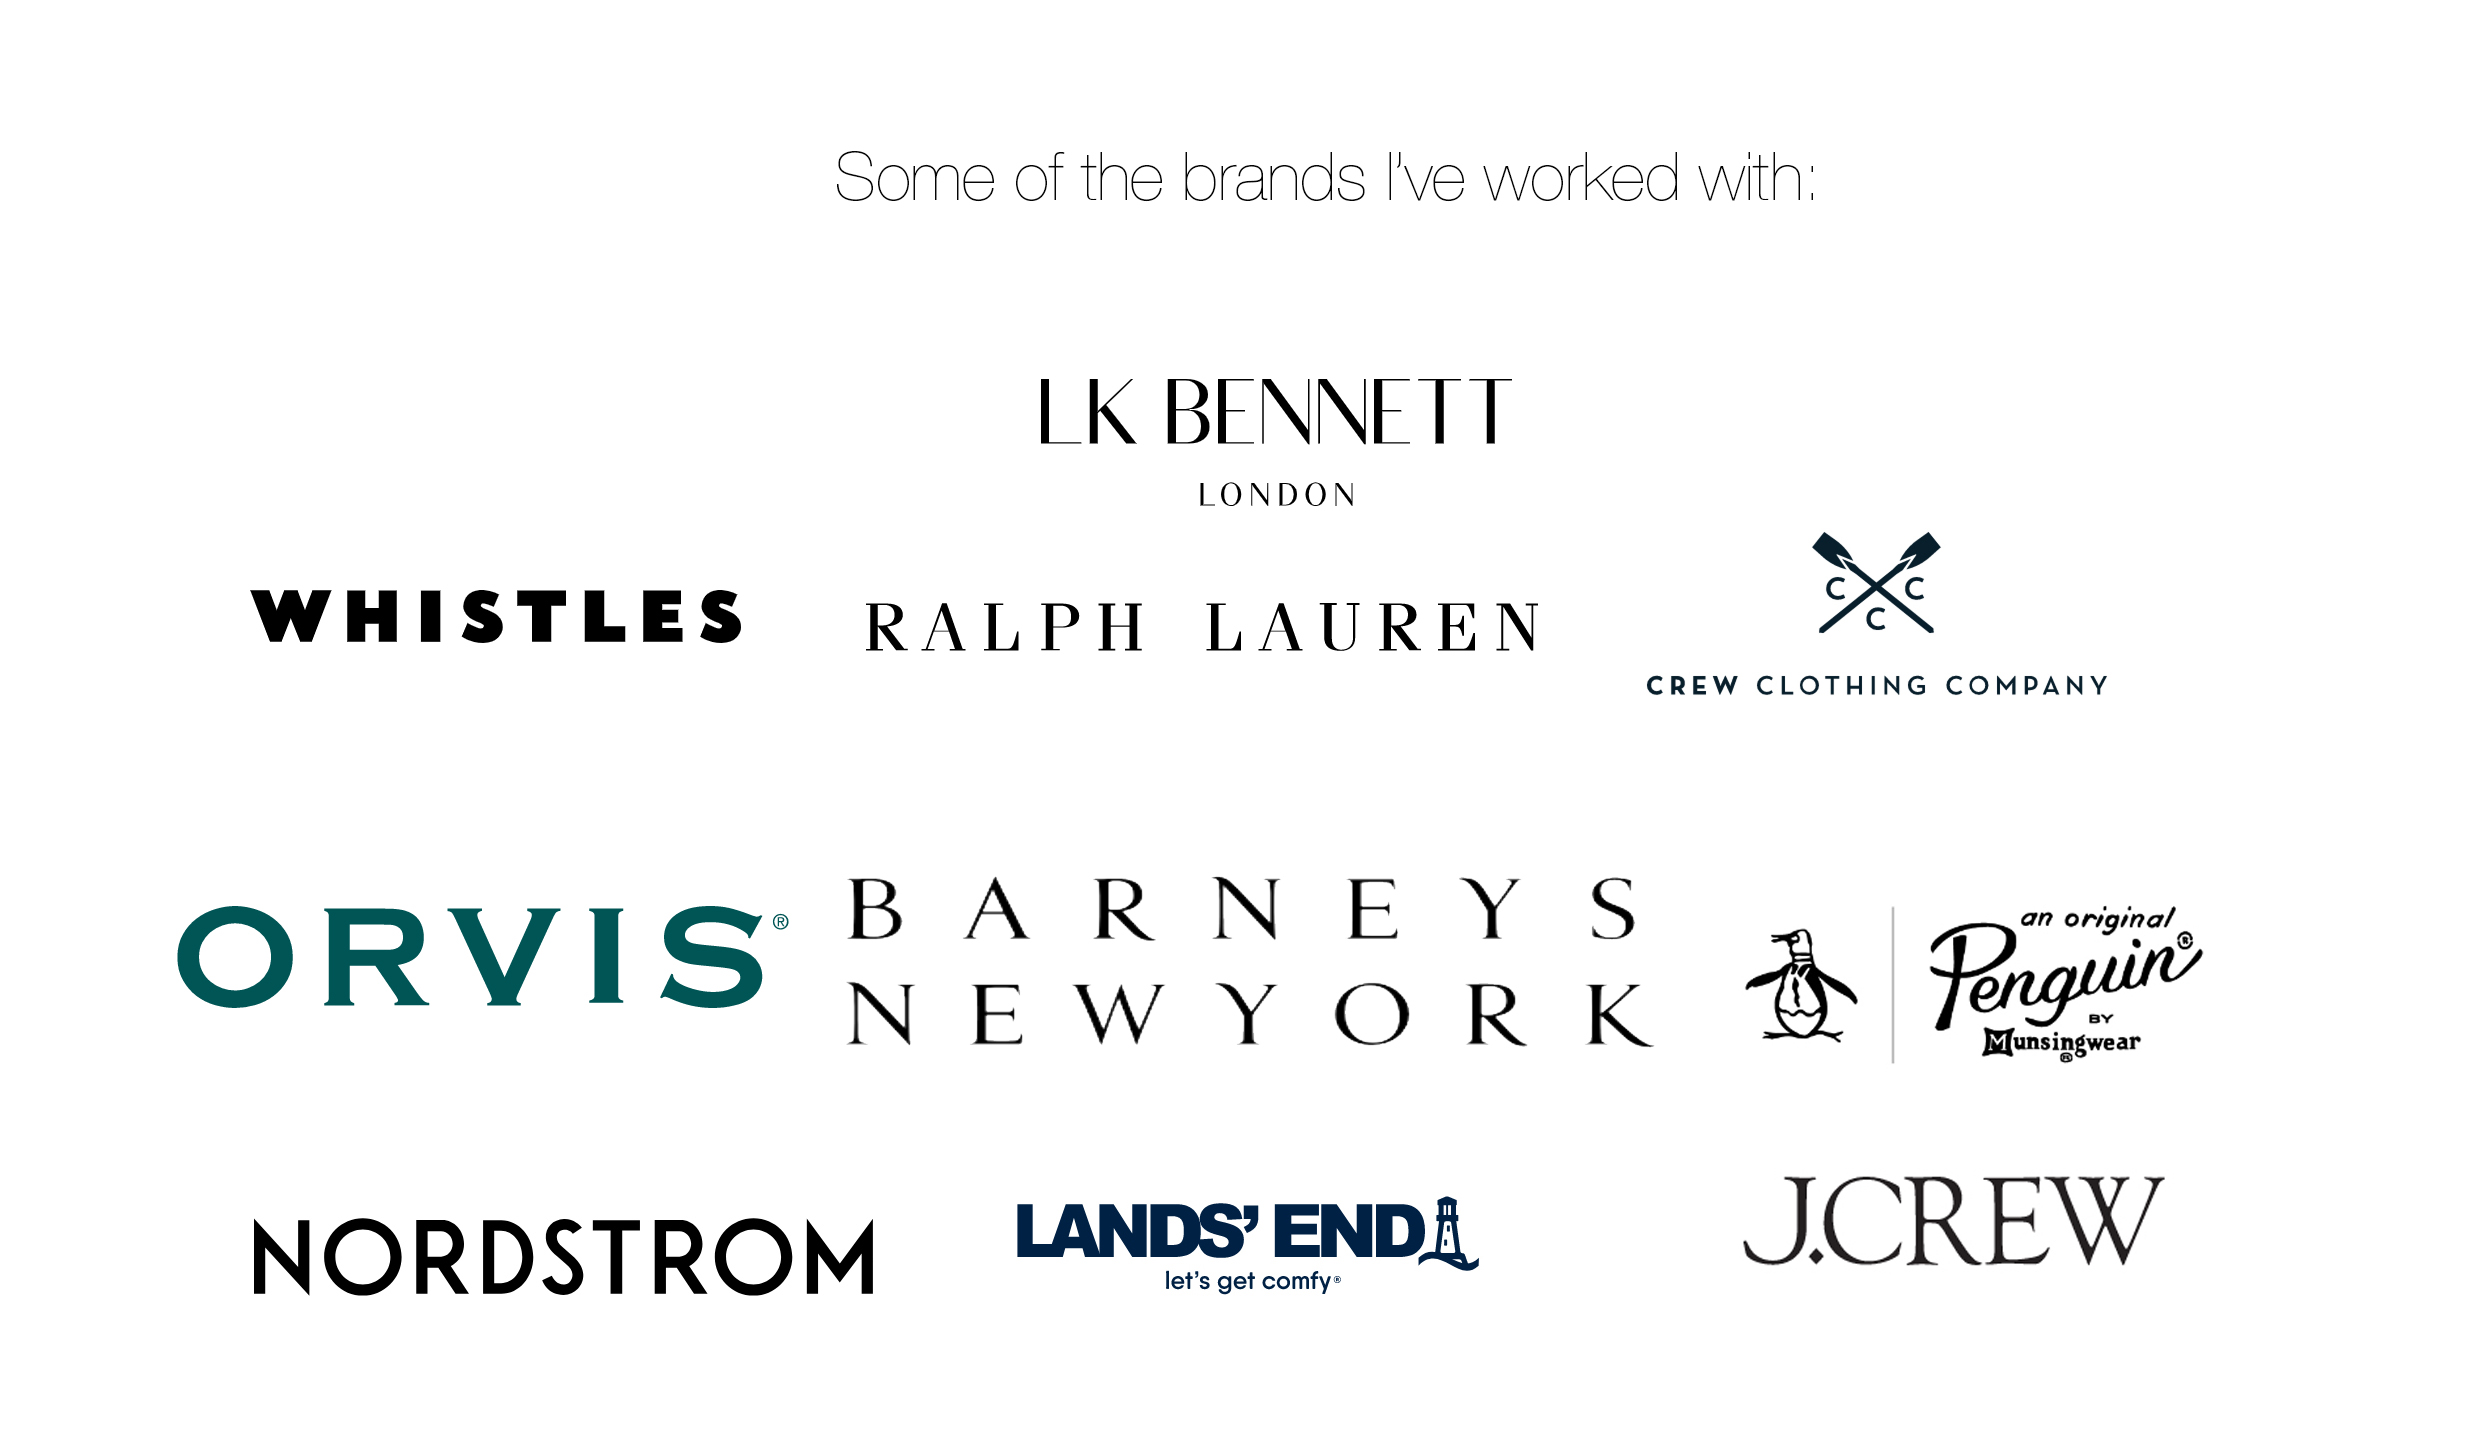 Brands I've worked with Kate Knight